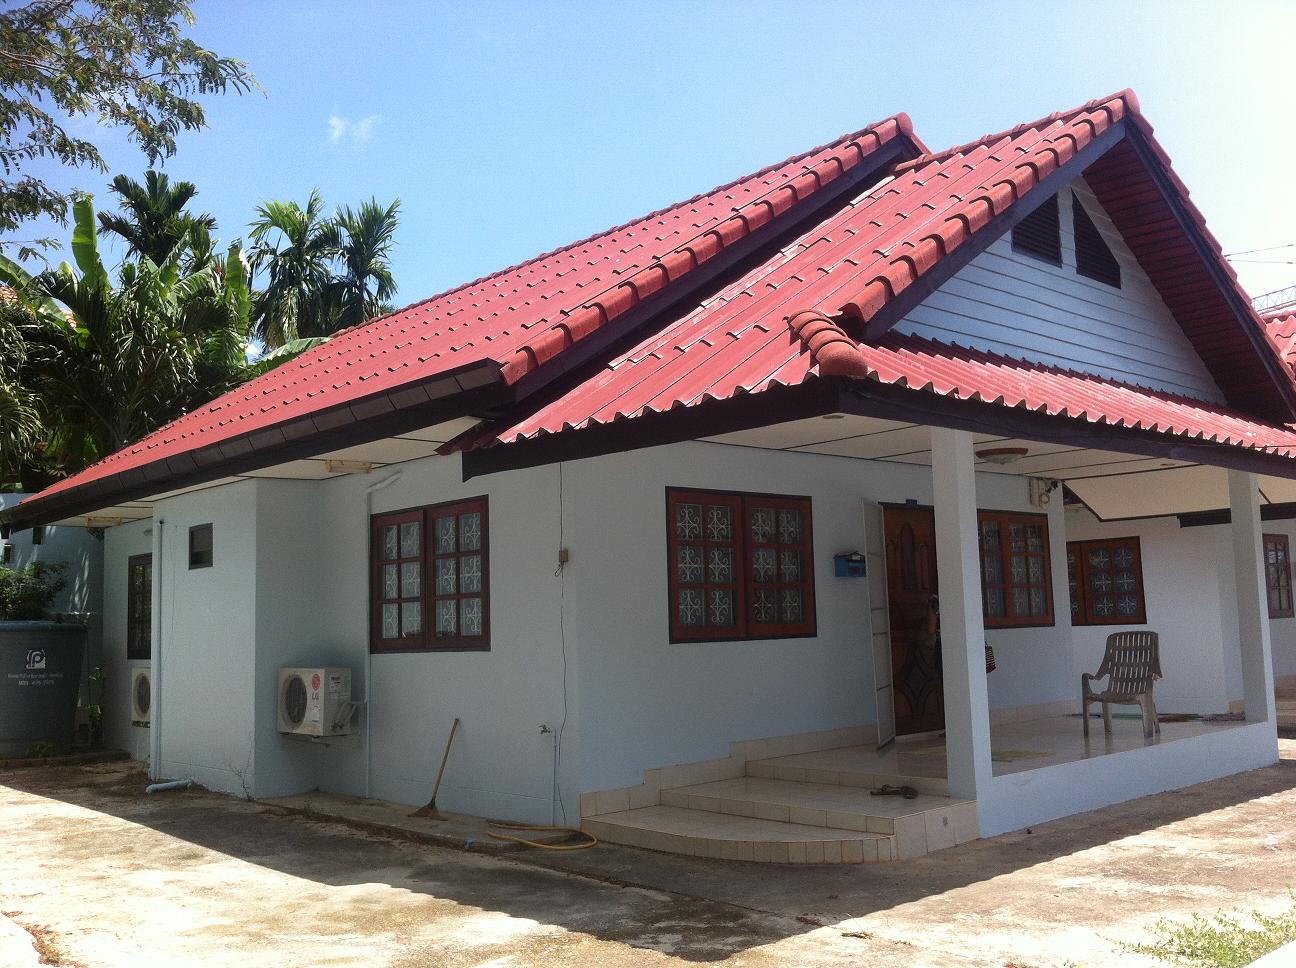 2 bedroom house in Karon 10 minutes walk to the beach